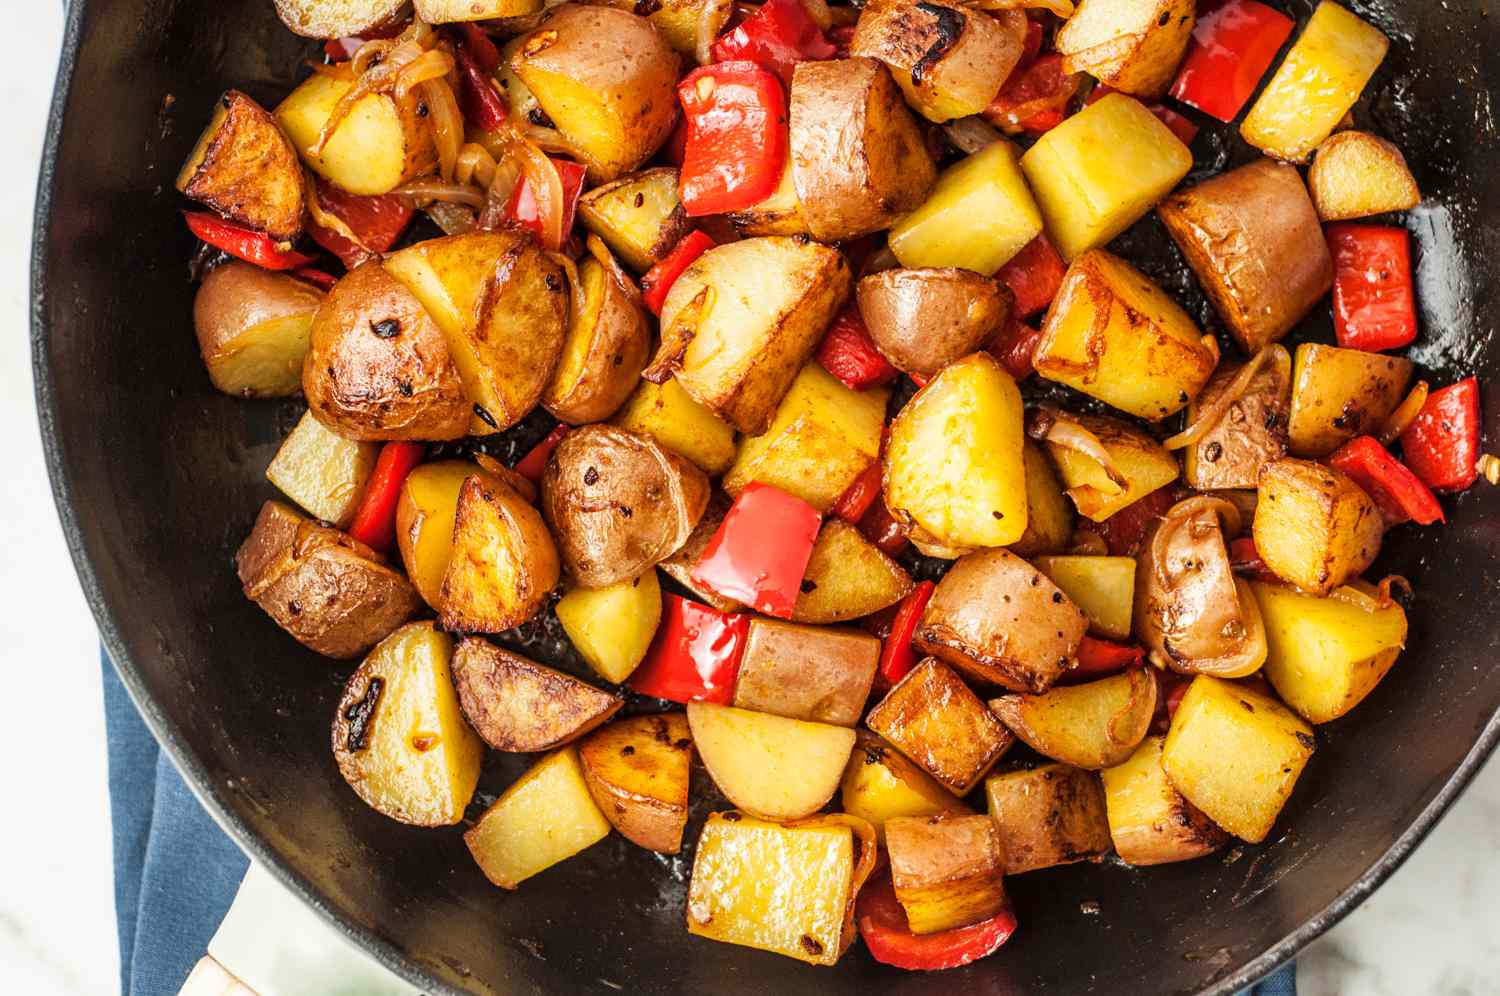 How To Make Fried Potatoes In An Electric Skillet